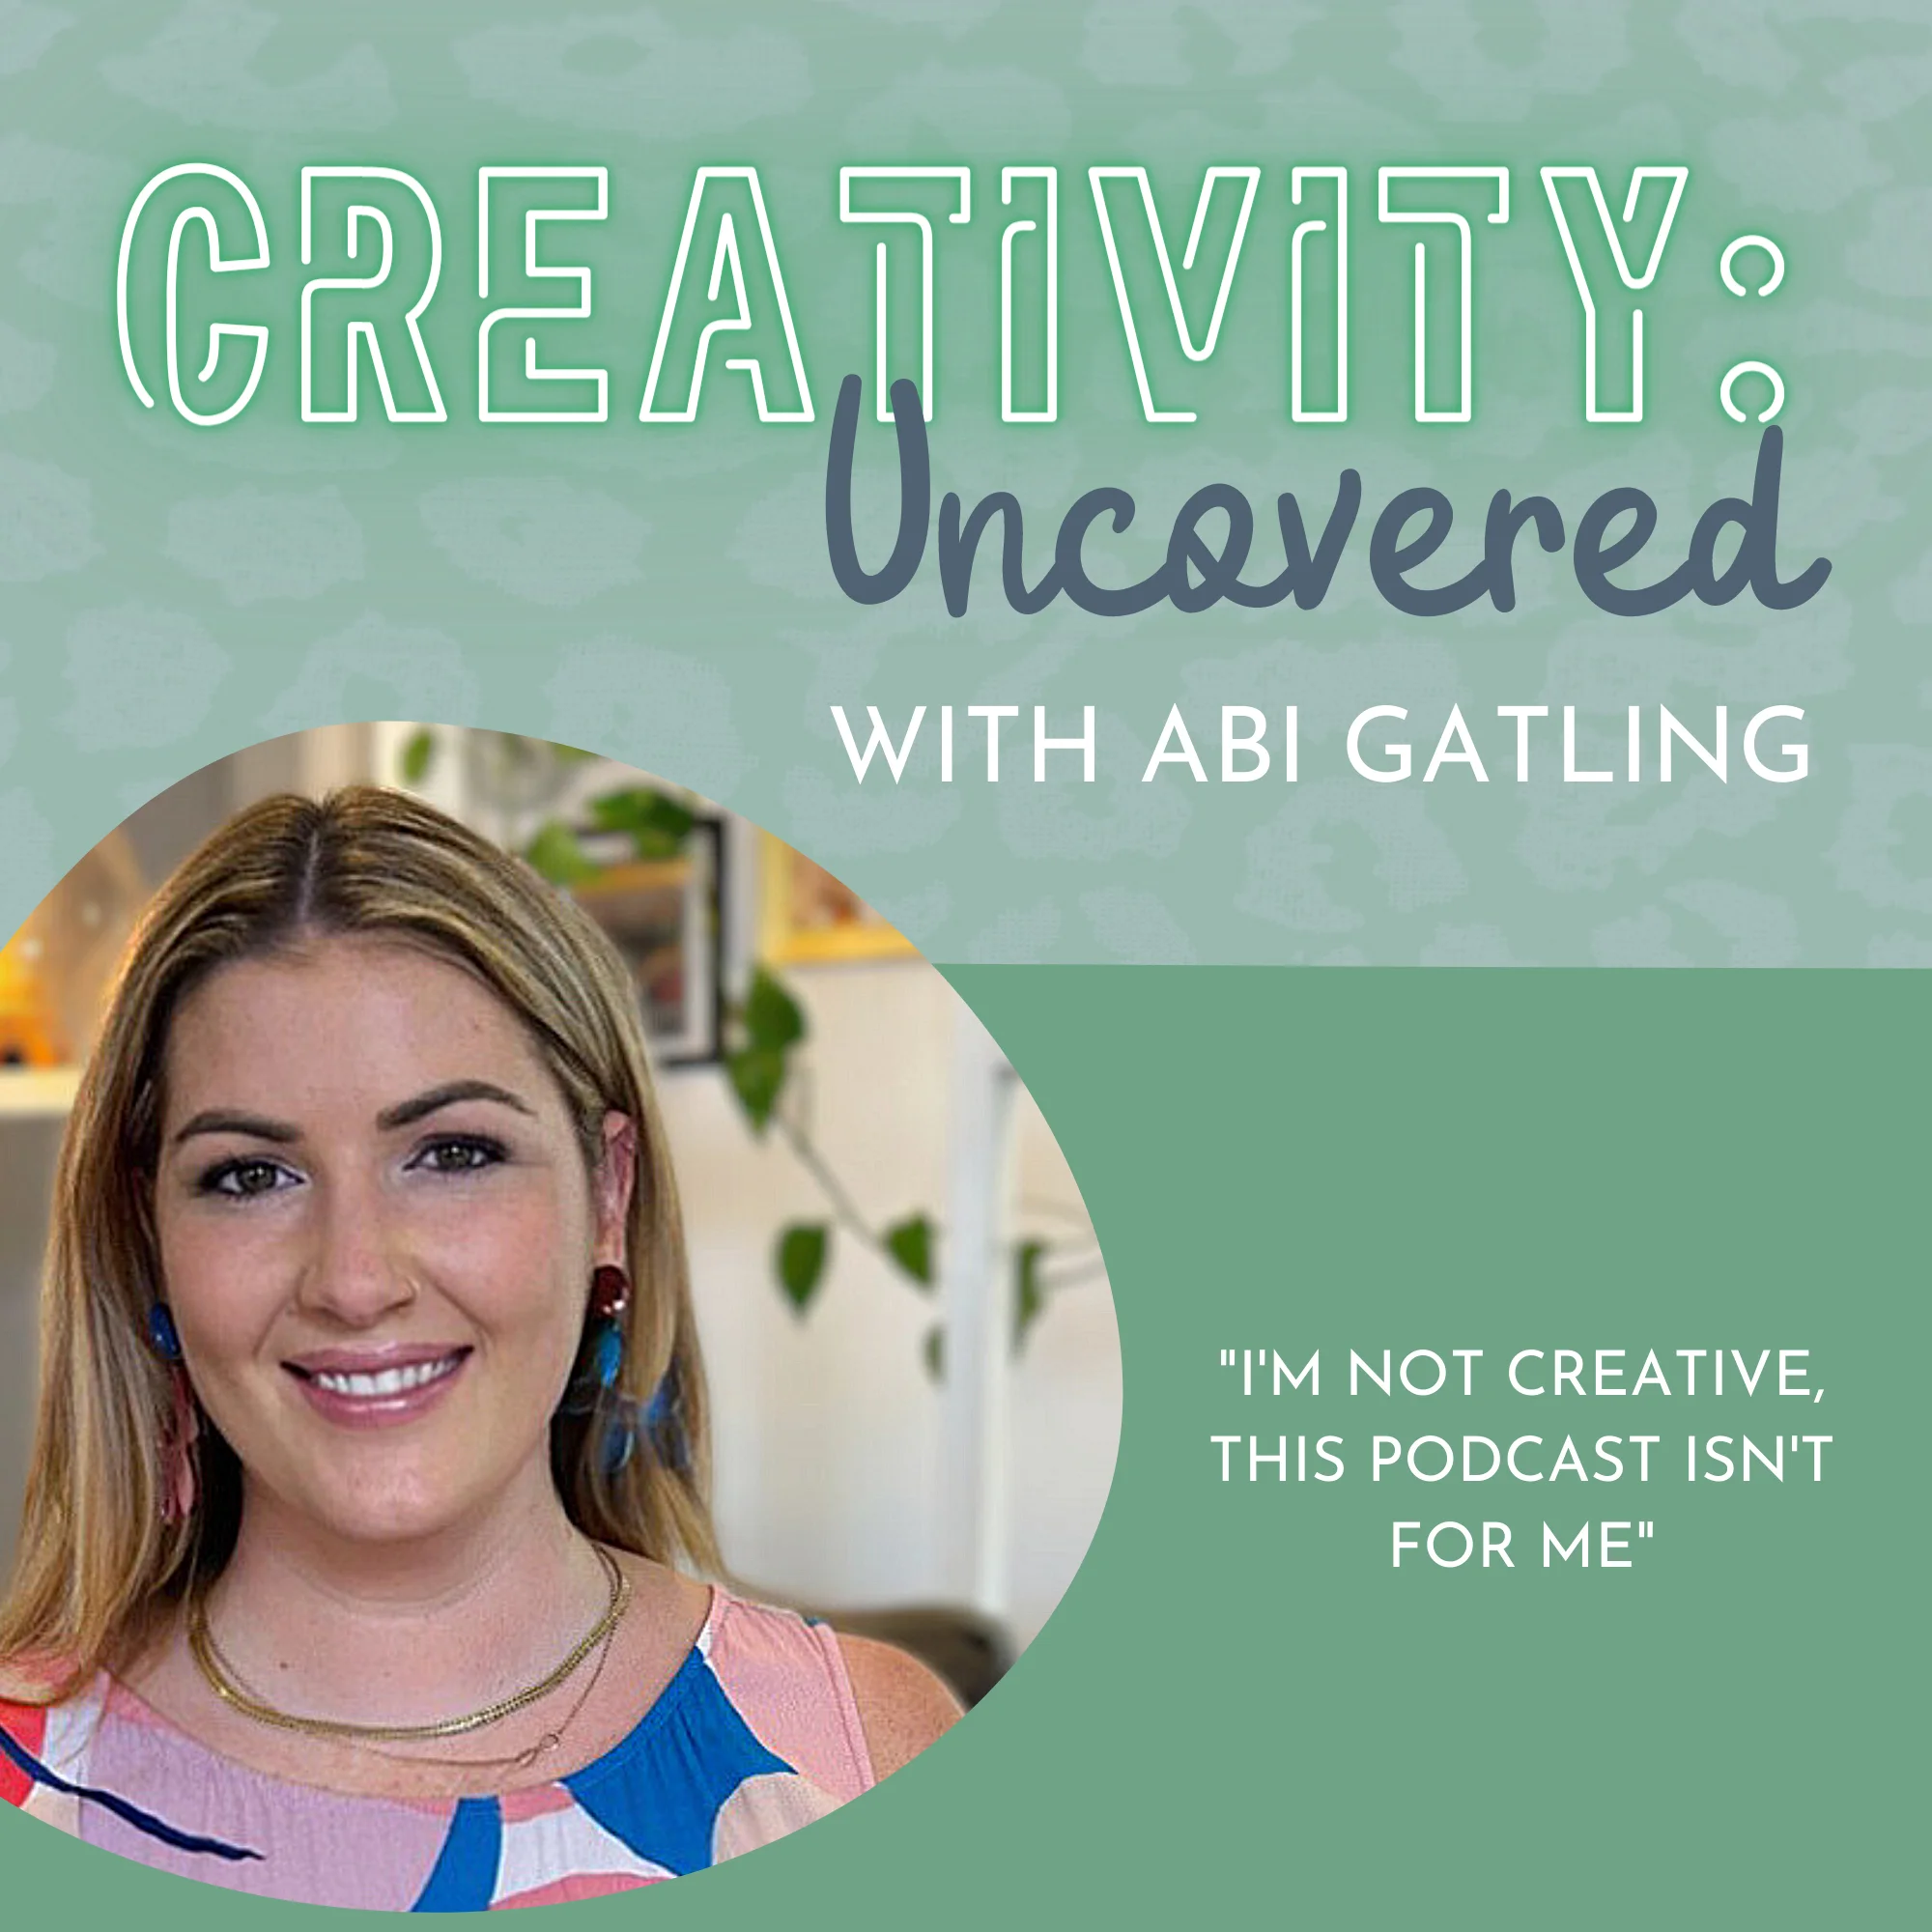 Creativity: Uncovered podcast episode graphic featuring host Abi Gatling